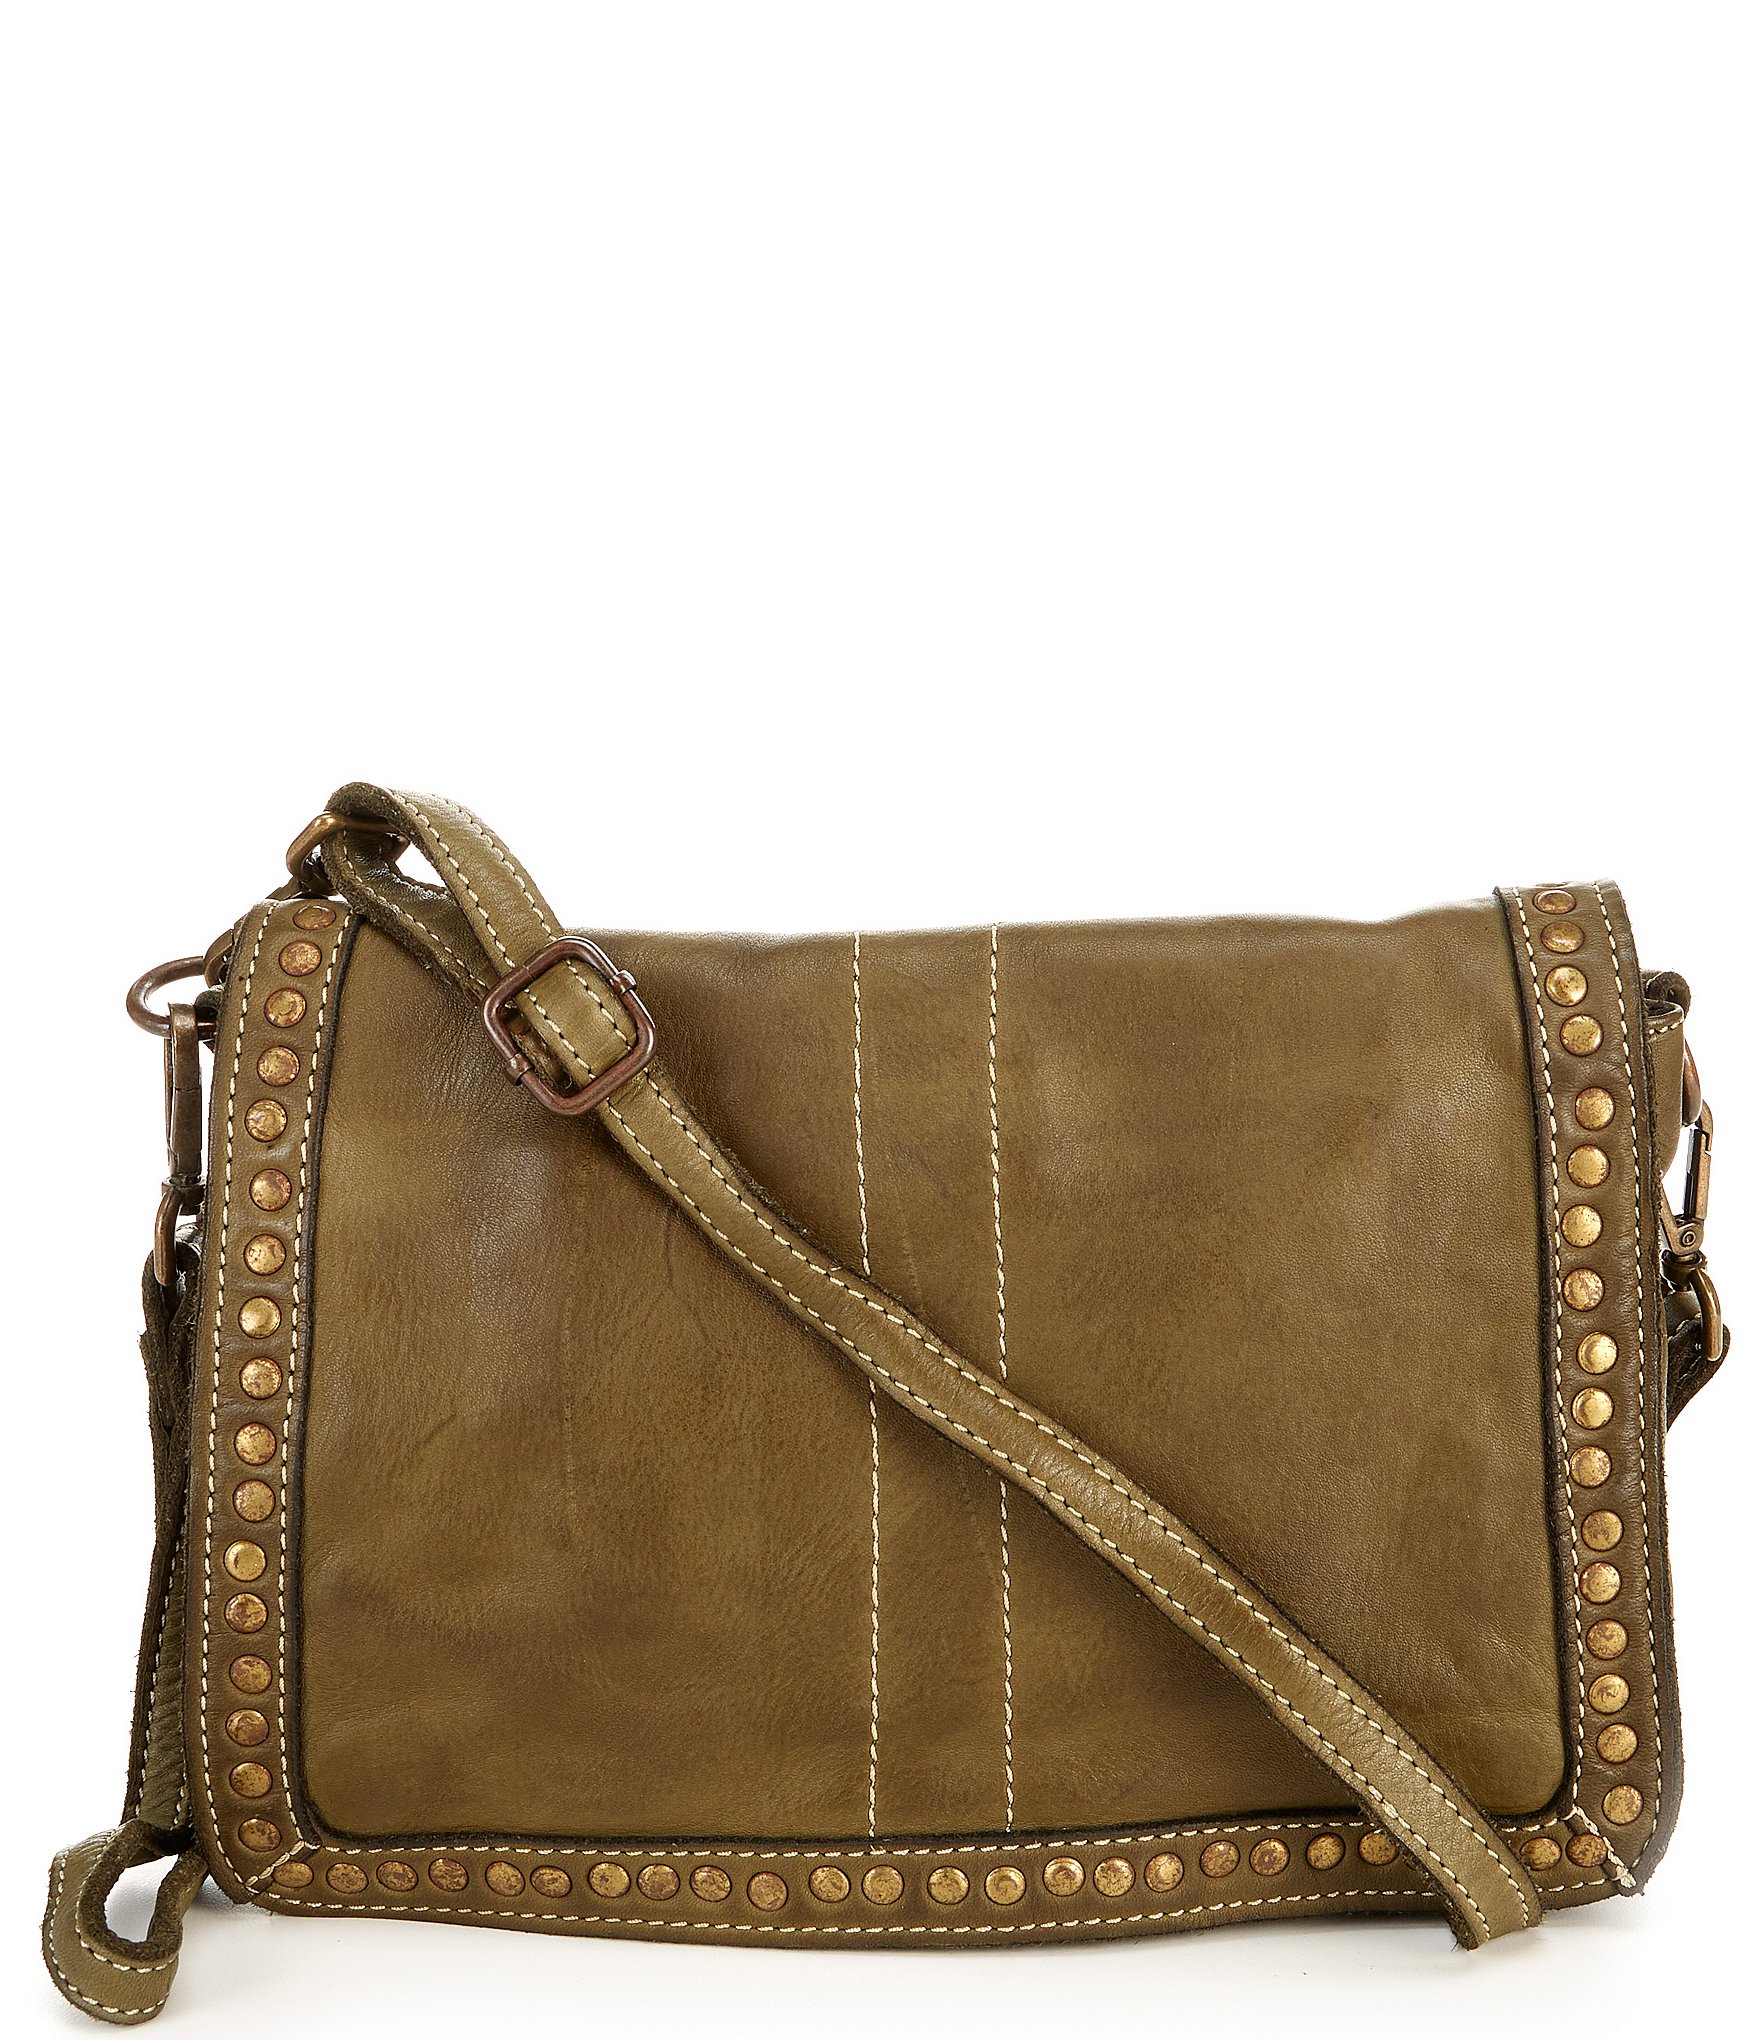 Dillard's Vintage Genuine Leather Made in Italy Cross Body